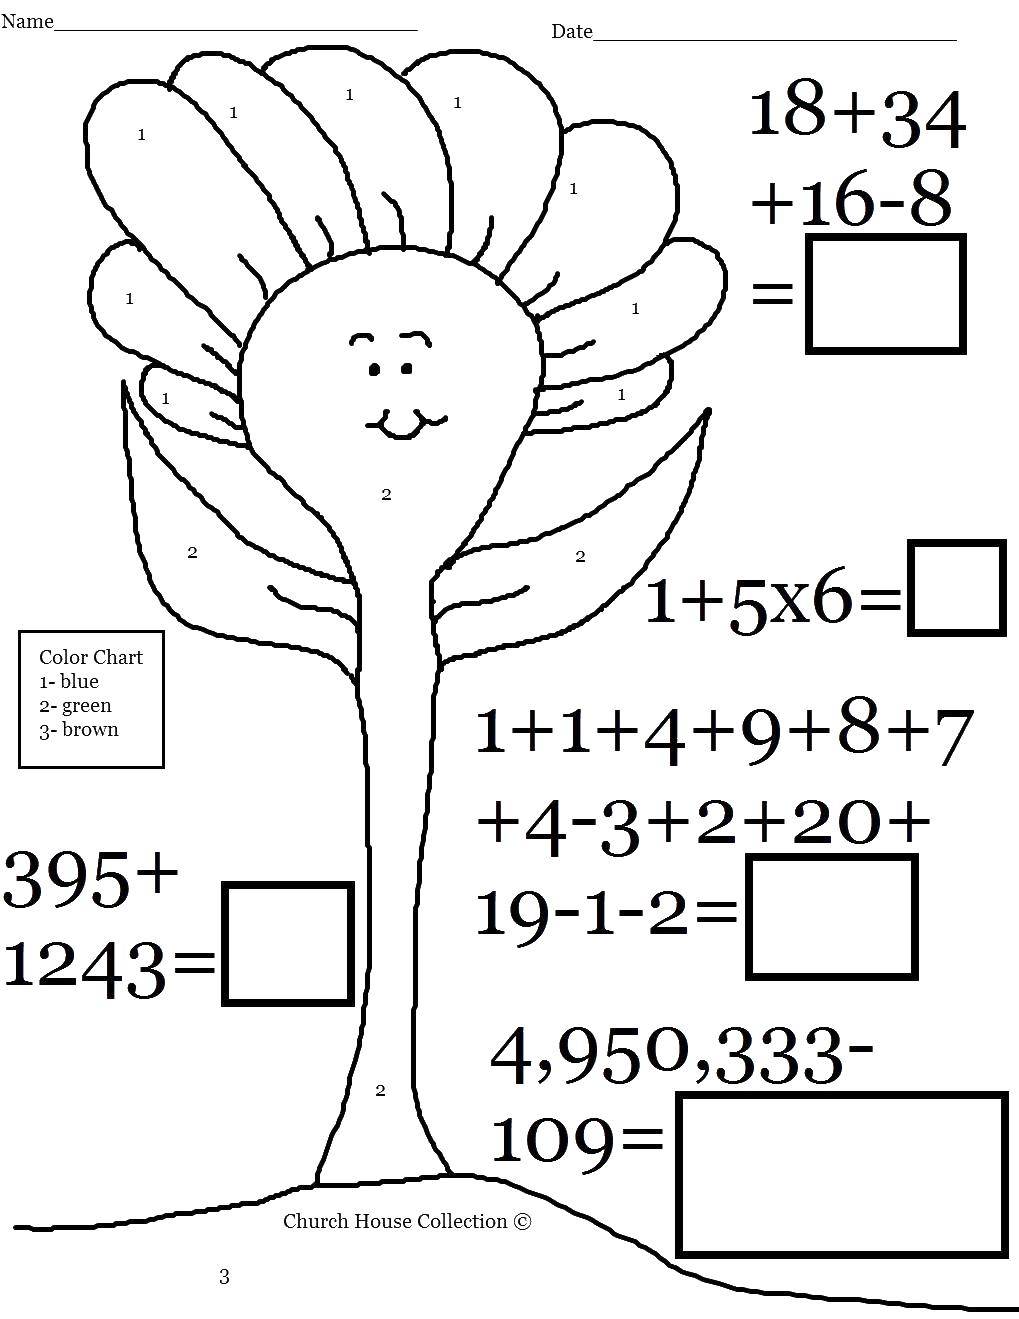 Coloring A mathematical coloring book. Category mathematical coloring pages. Tags:  the mathematical coloring, flower.